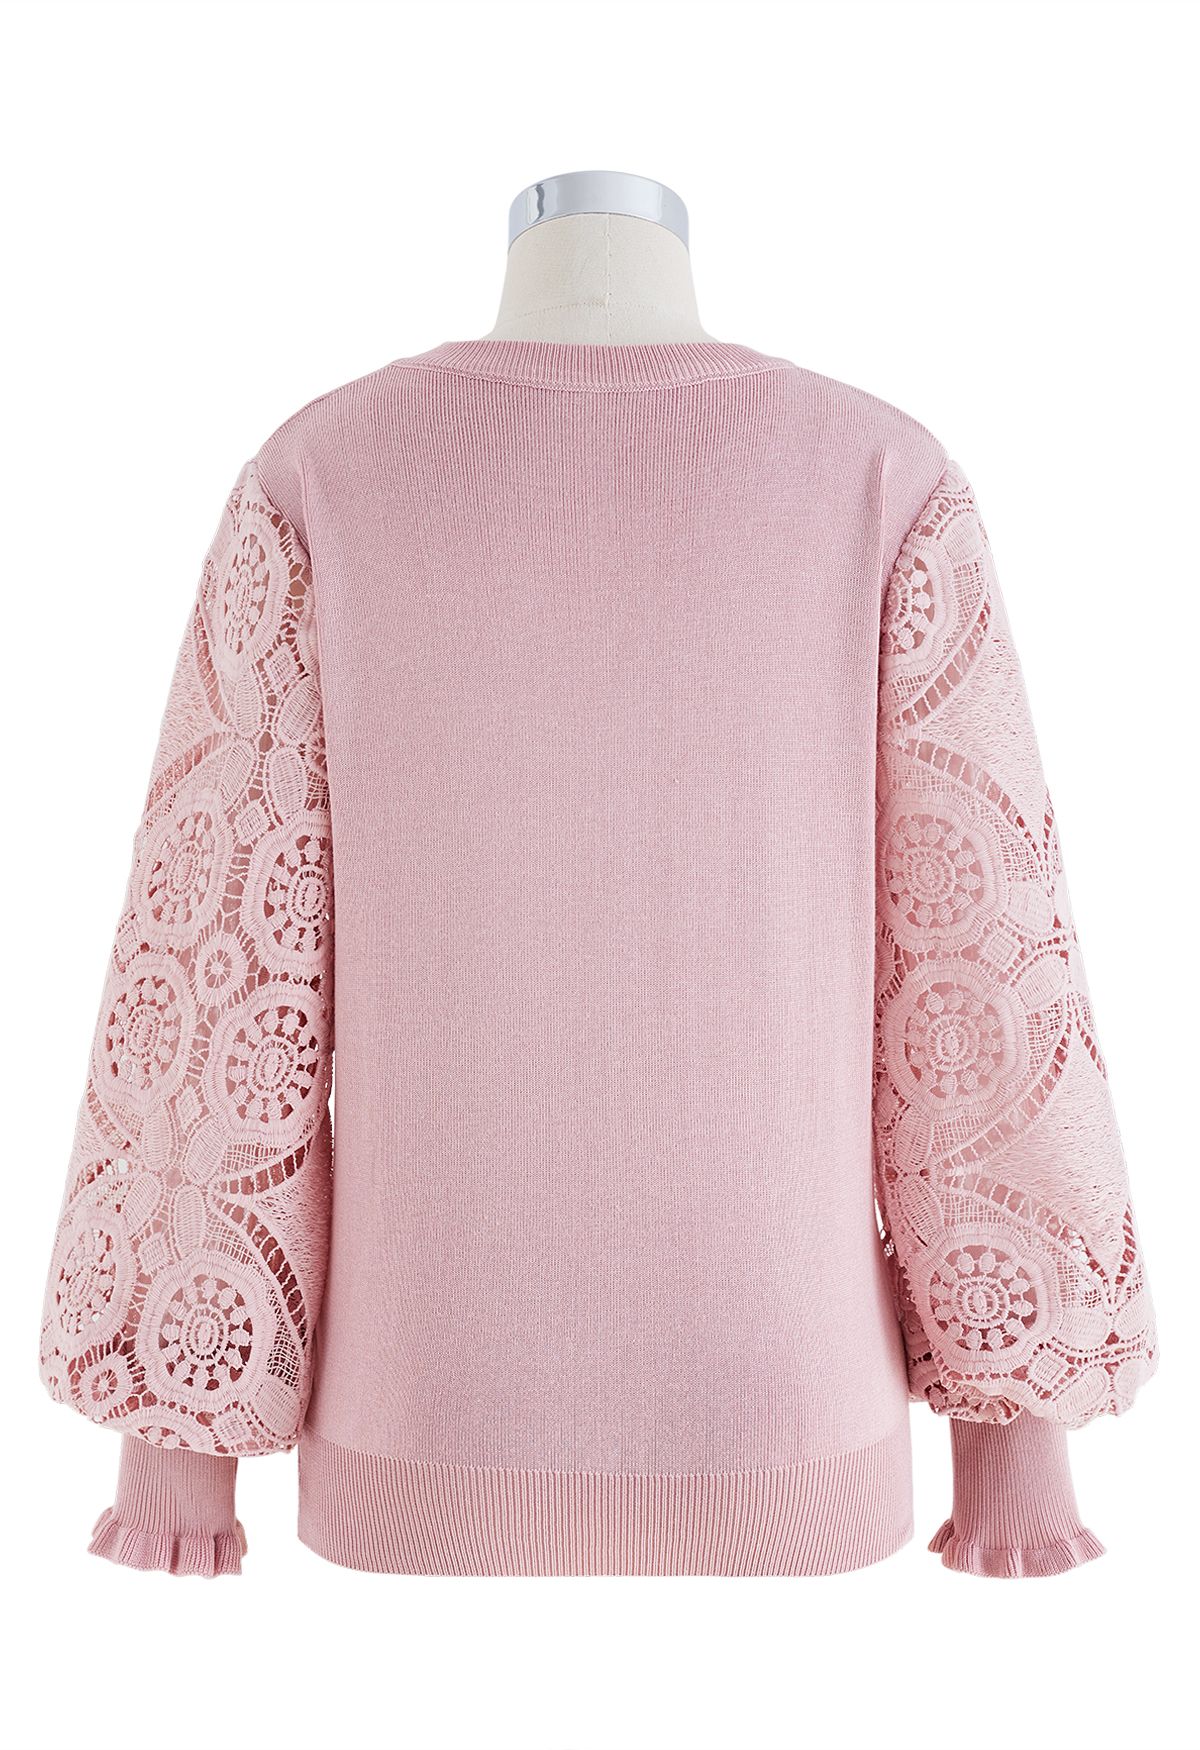 Floral Crochet Sleeve Knit Top in Pink